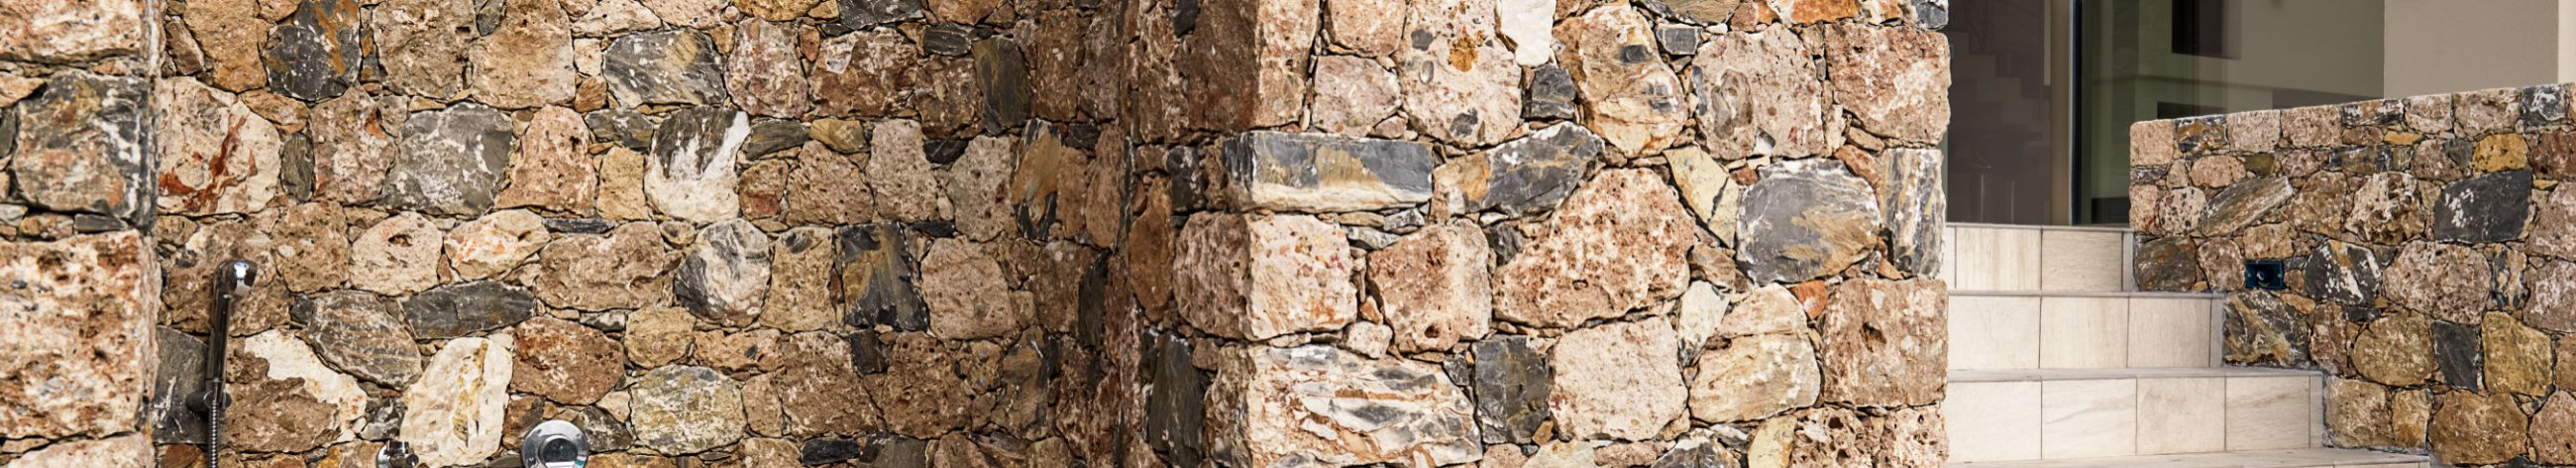 custom-made stonework, natural stone for homes, commercial stone installation, natural stone suppliers, interior stone design, exterior stone design, exterior finishing, outer stone finish, internal stone decoration, construction of the stone wall